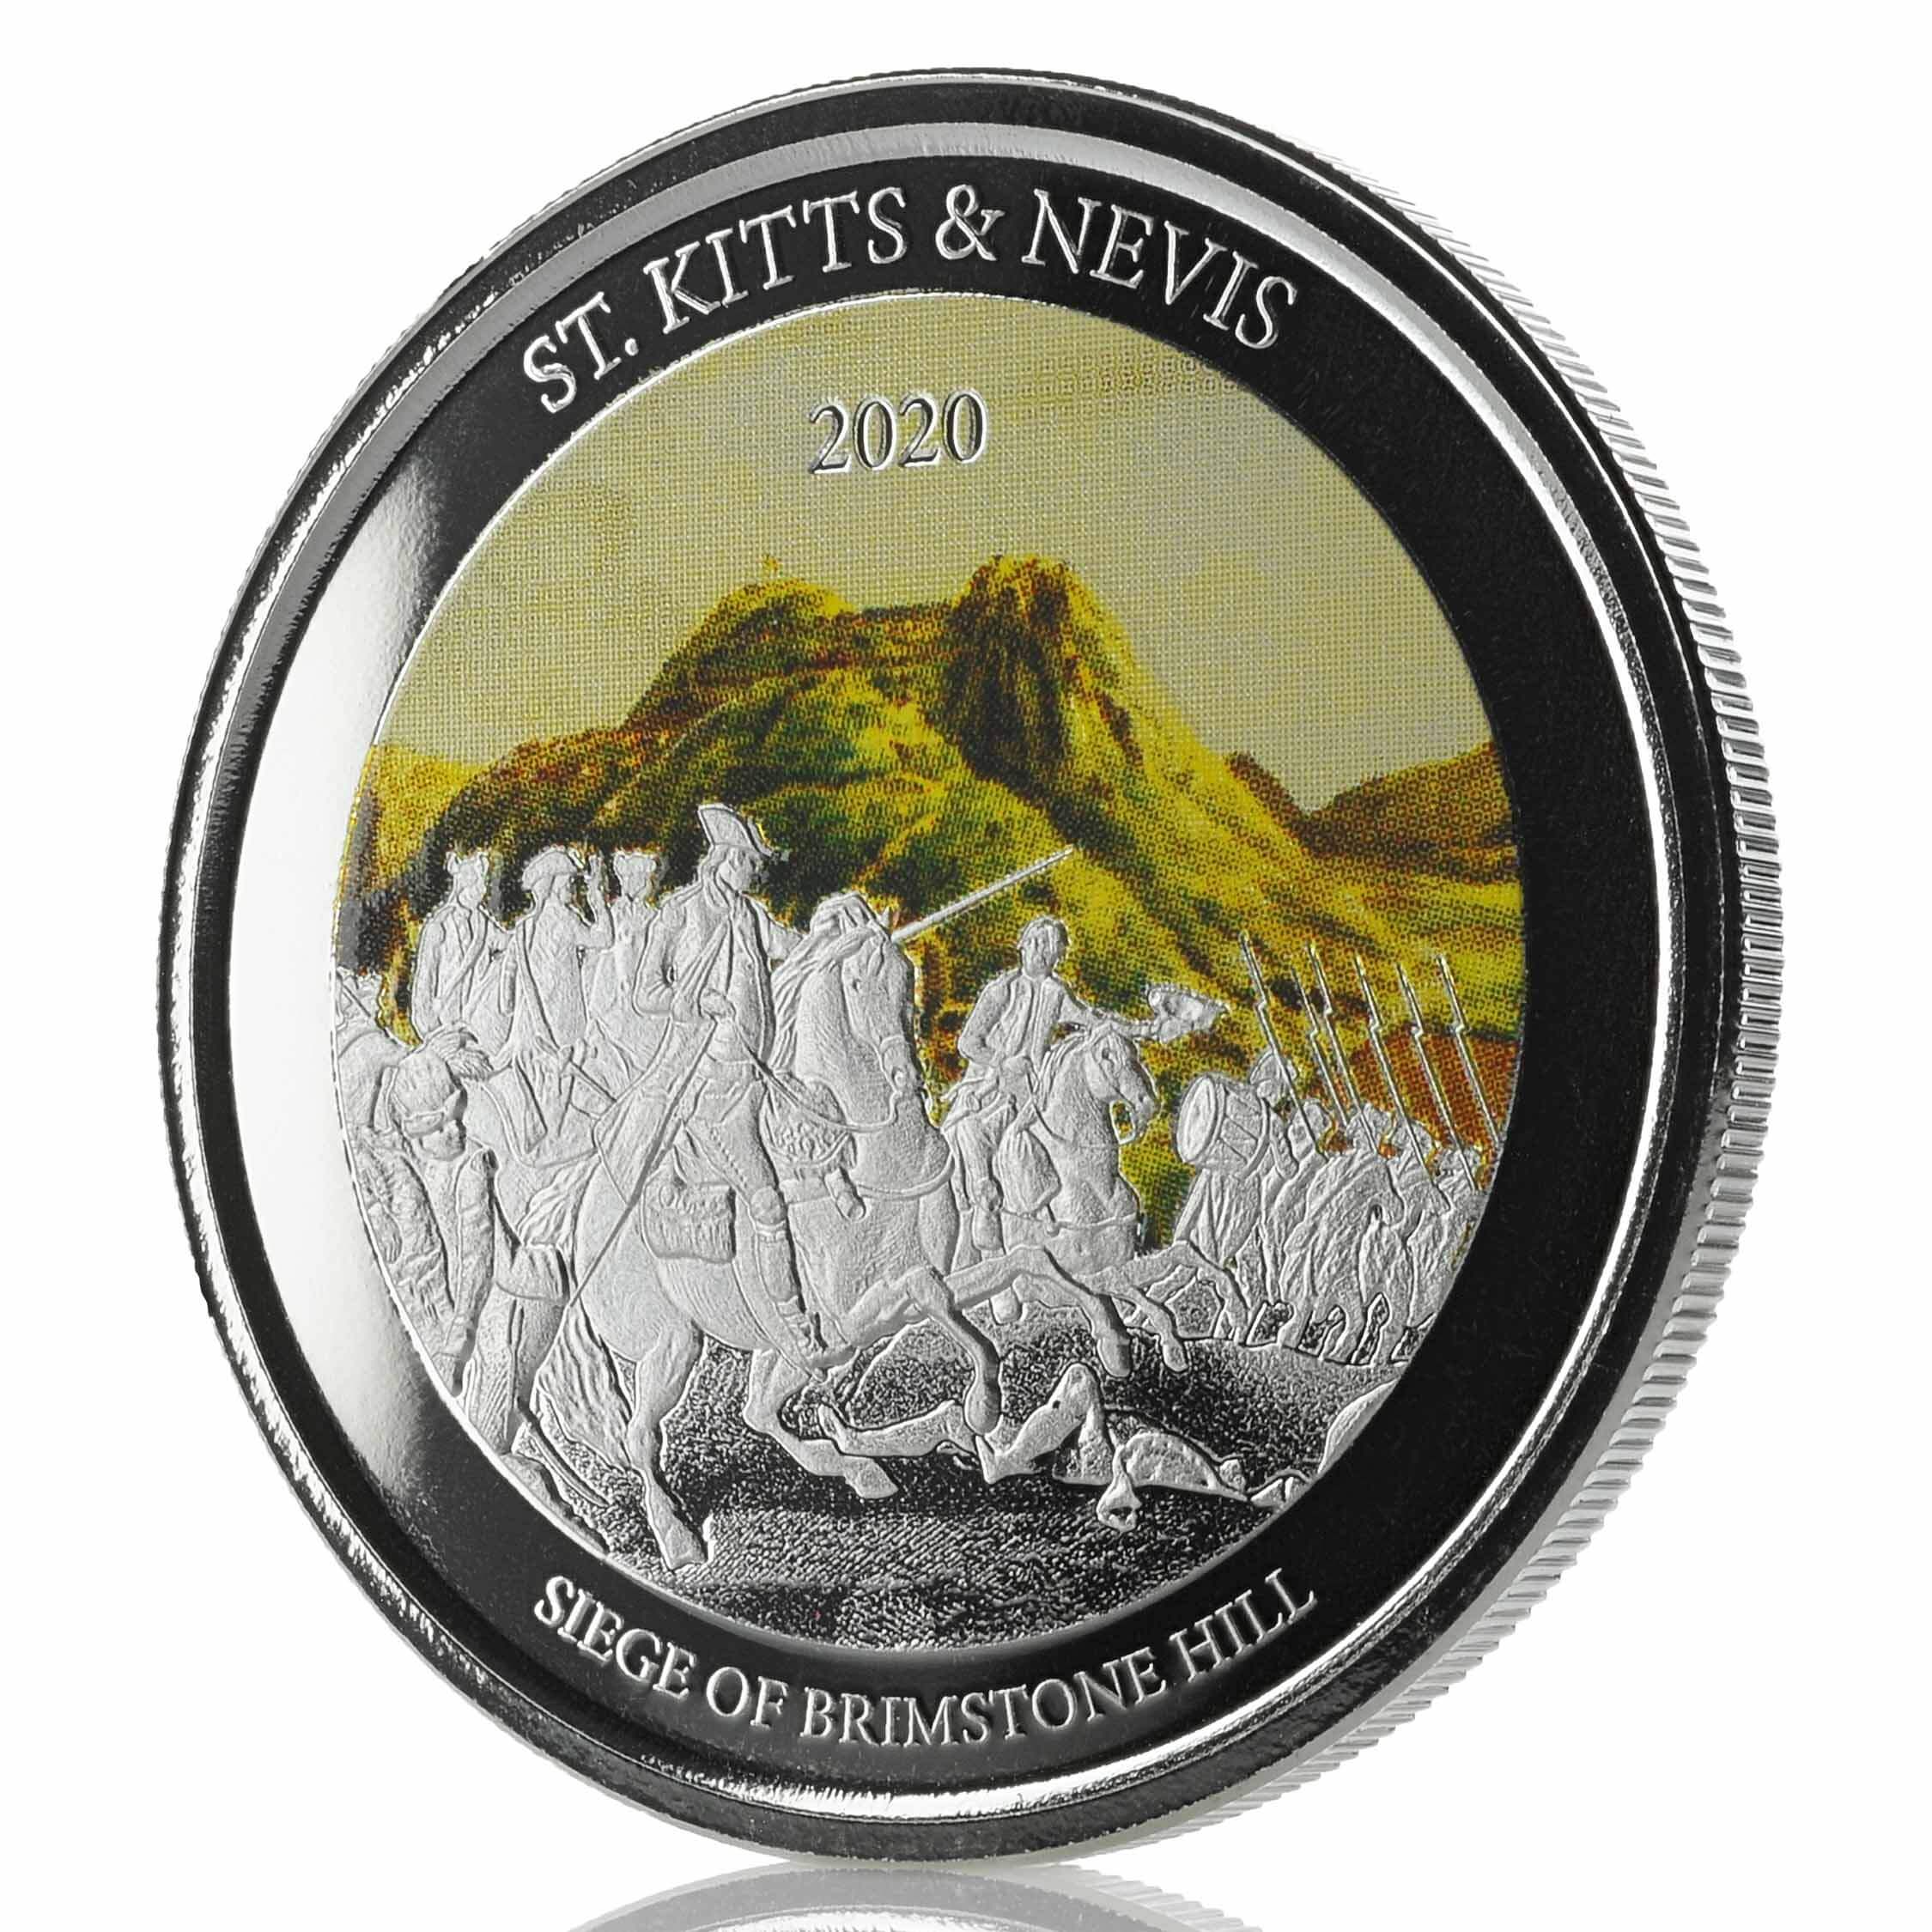 2020 Ec8 St. Kitts & Nevis "siege Of Brimstone Hill" 1 Oz Silver Color Coin